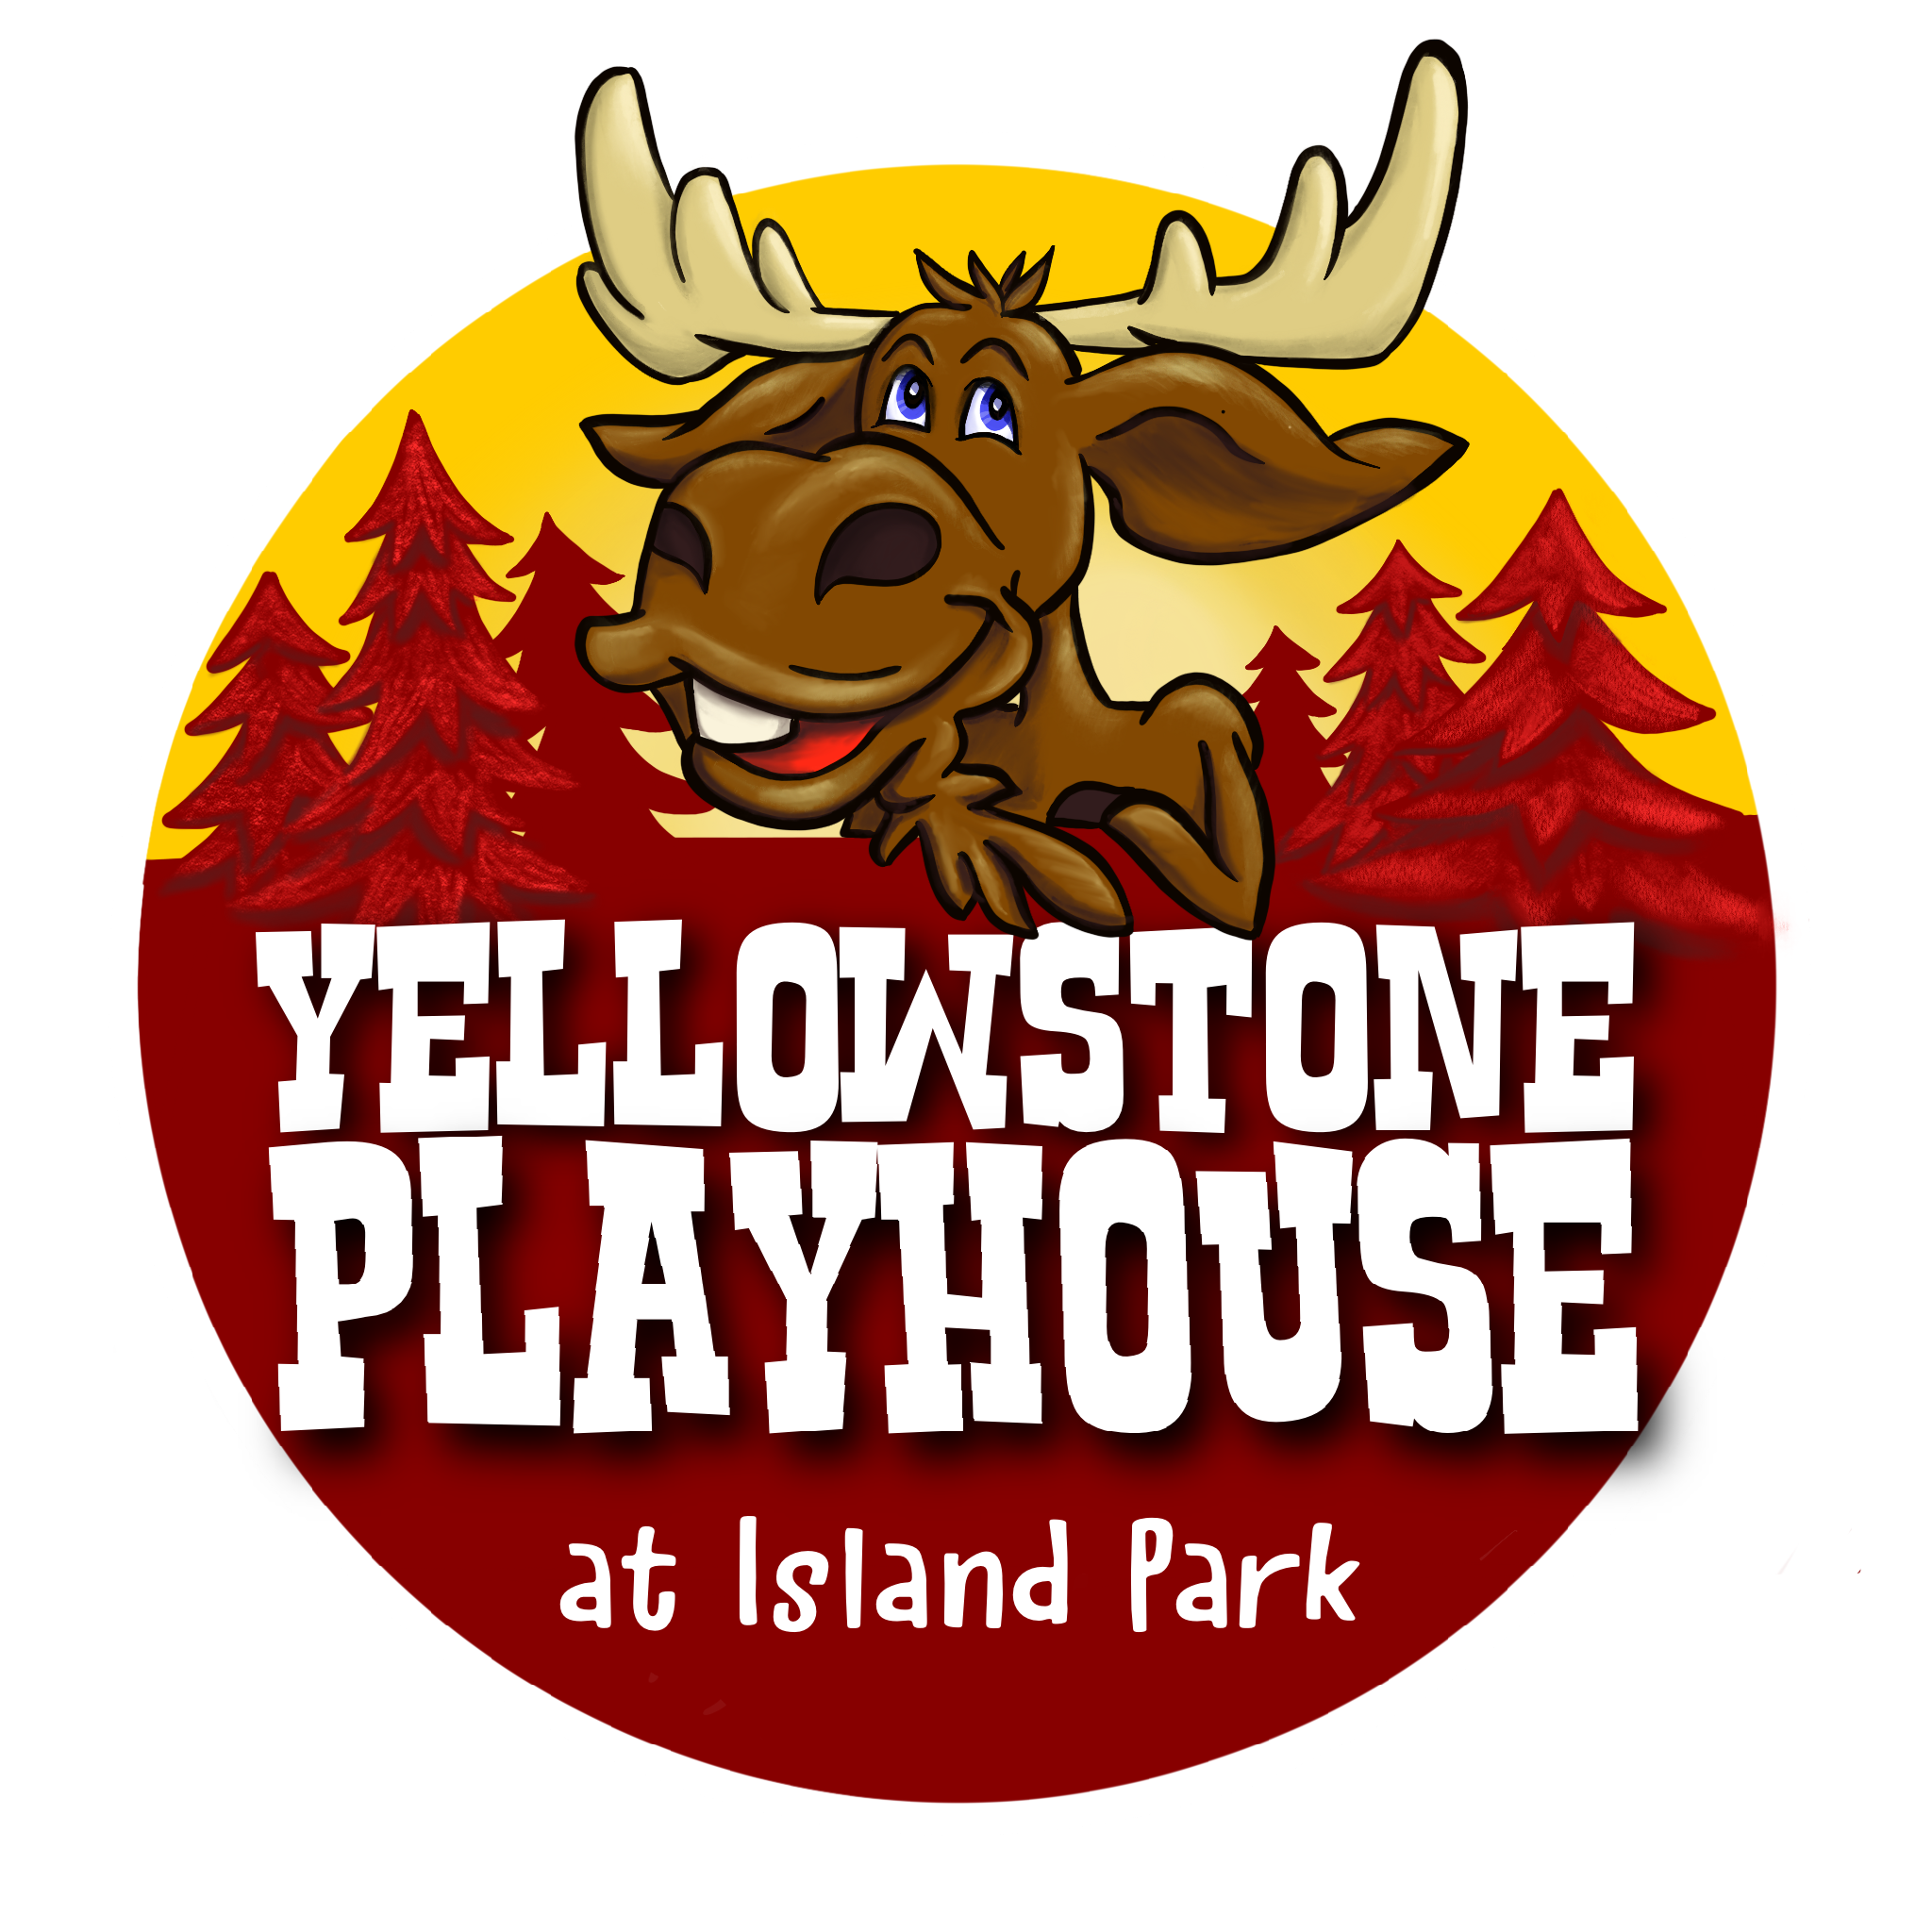 Yellowstone Playhouse in Island Park Family Friendly Musical Spoofs